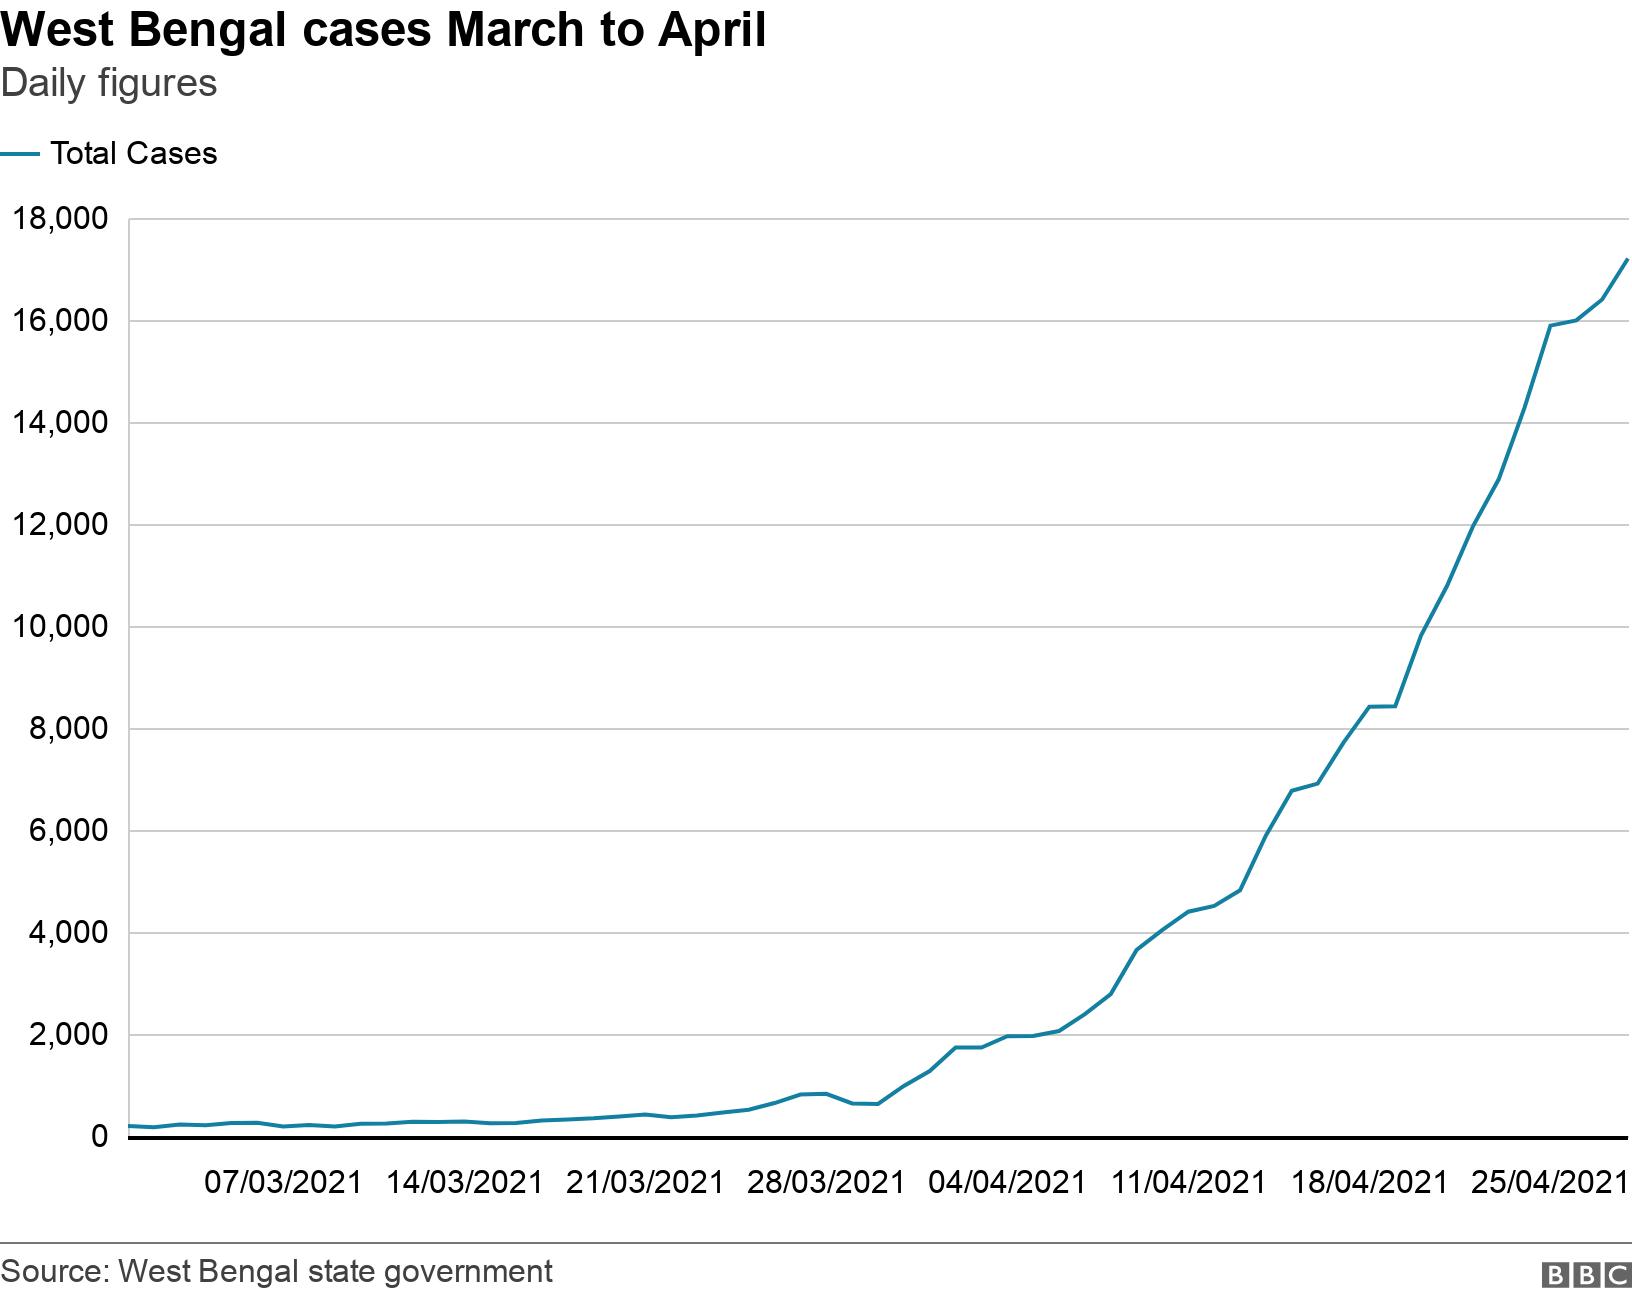  West Bengal cases March to April. Daily figures.  .